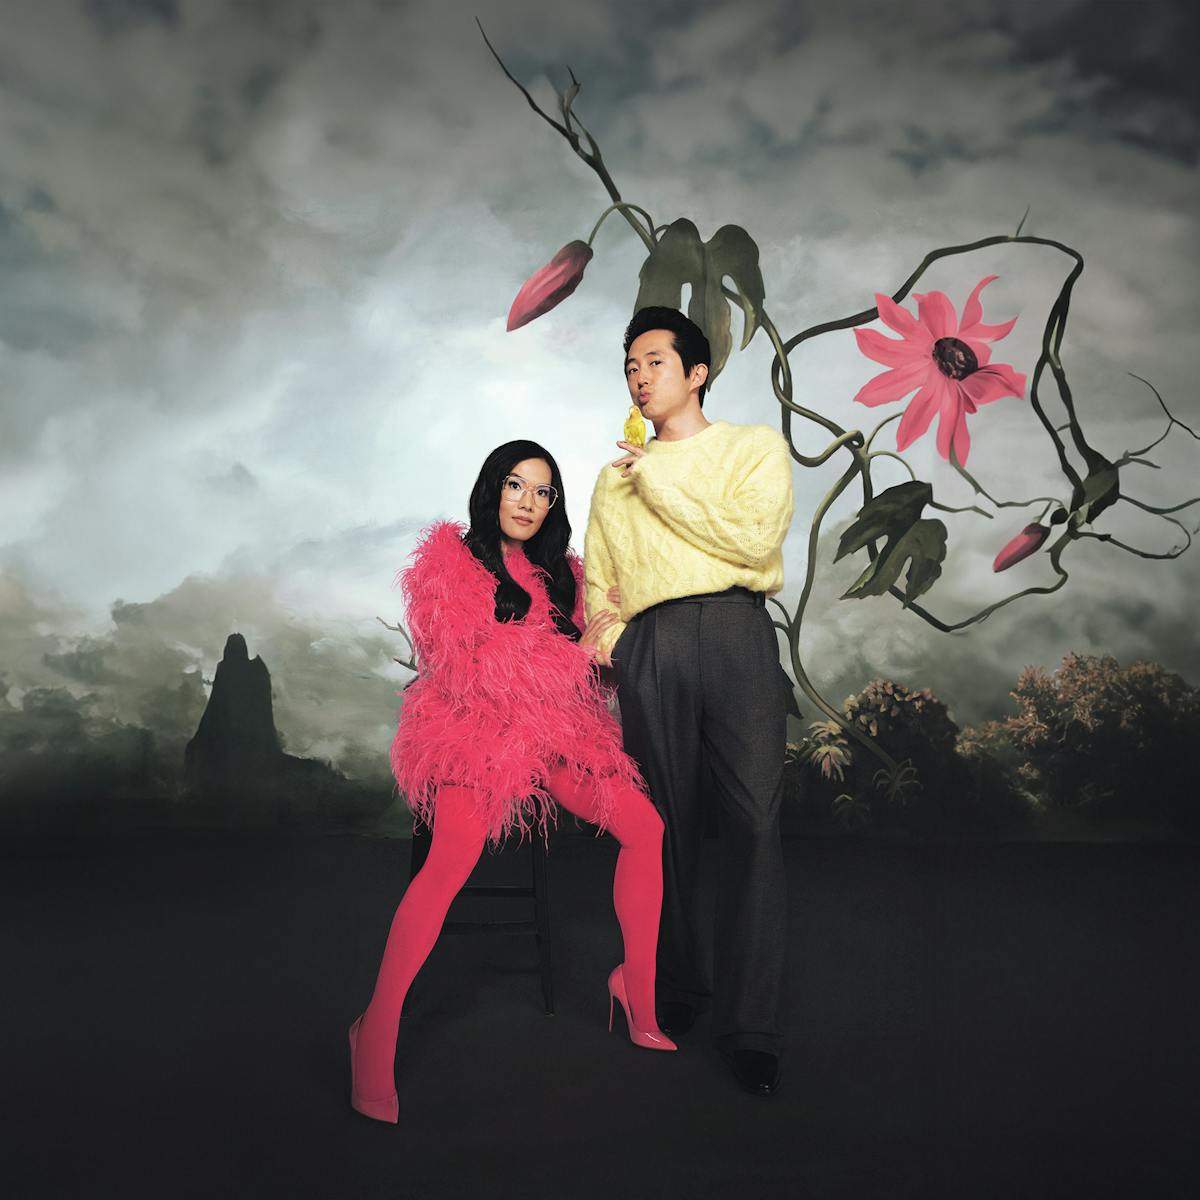 Ali Wong and Steven Yeun pose together against a dramatic cloudy background. Wong wears a pink ensemble; Yeun wears charcoal pants and a yellow sweater.